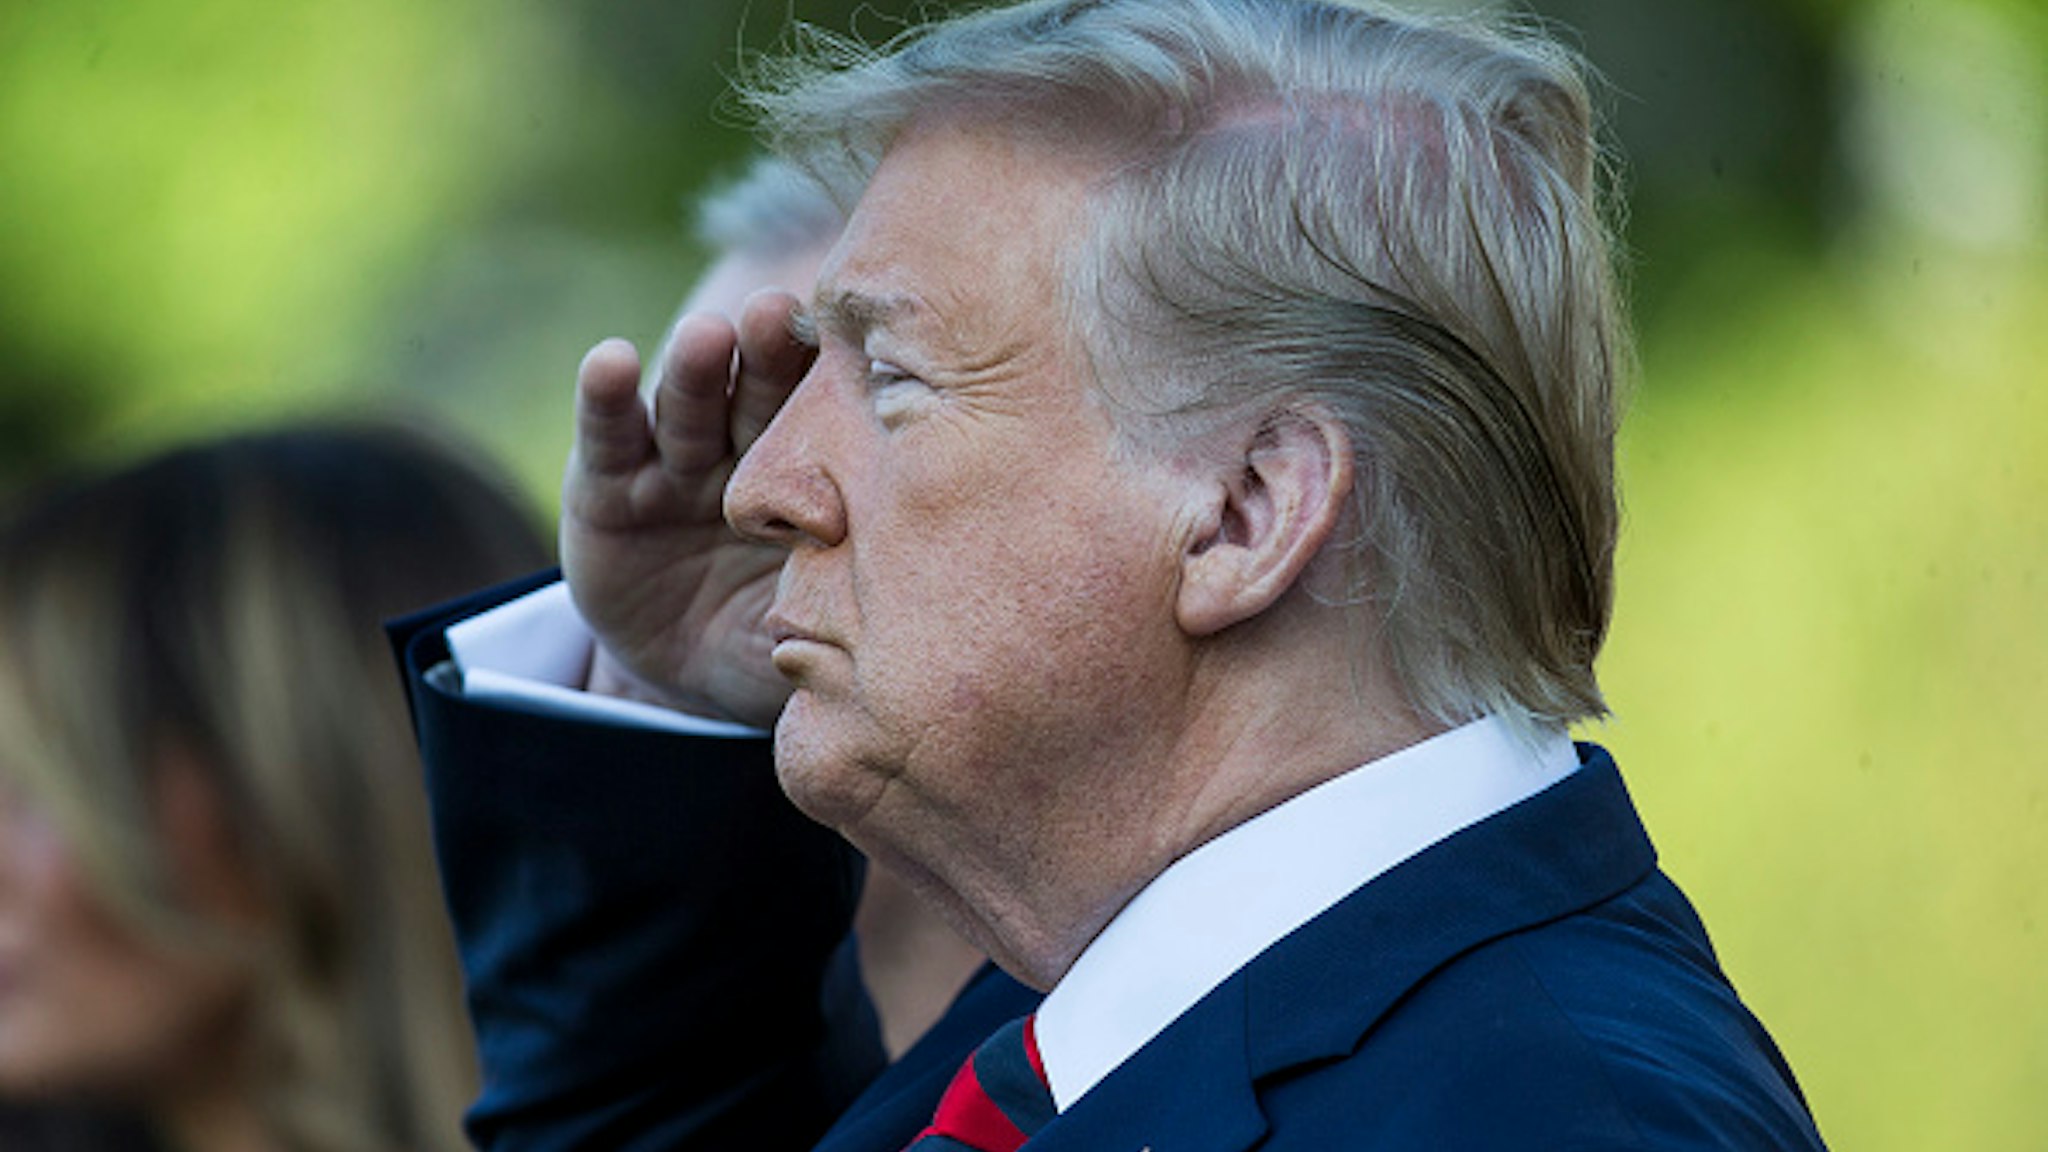 WASHINGTON, DC - SEPTEMBER 20: U.S. President Donald Trump salutes during an official visit ceremony welcoming Australian Prime Minister Scott Morrison and Australian first lady Jennifer Morrison at the South Lawn at the White House September 20, 2019 in Washington, DC.